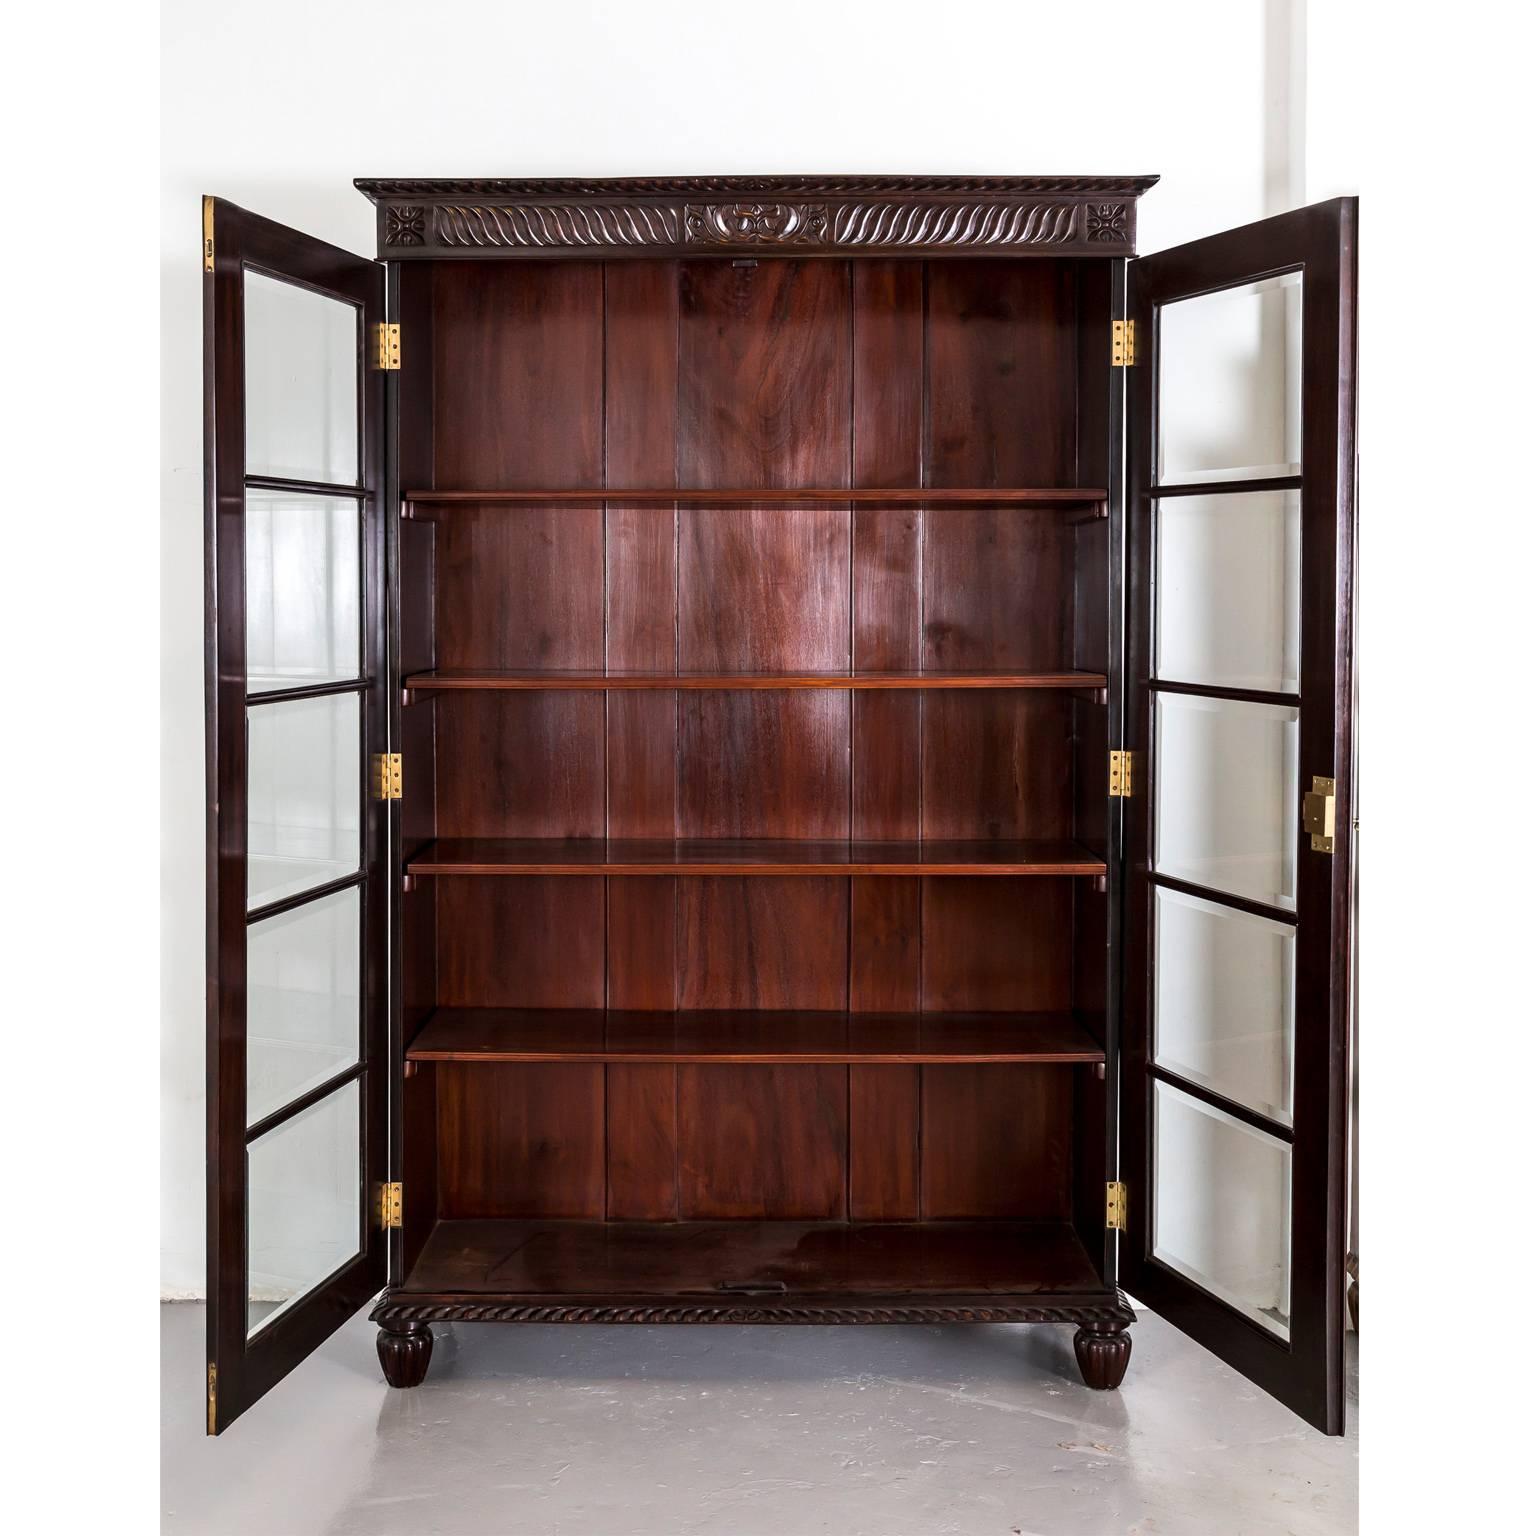 A British Colonial library bookcase in rosewood with a flat top, egg and dart carving on the edge and wave carving on the frieze centred by a floral block on the frieze. 
The frames of the double doors are carved with elongated reserves and each